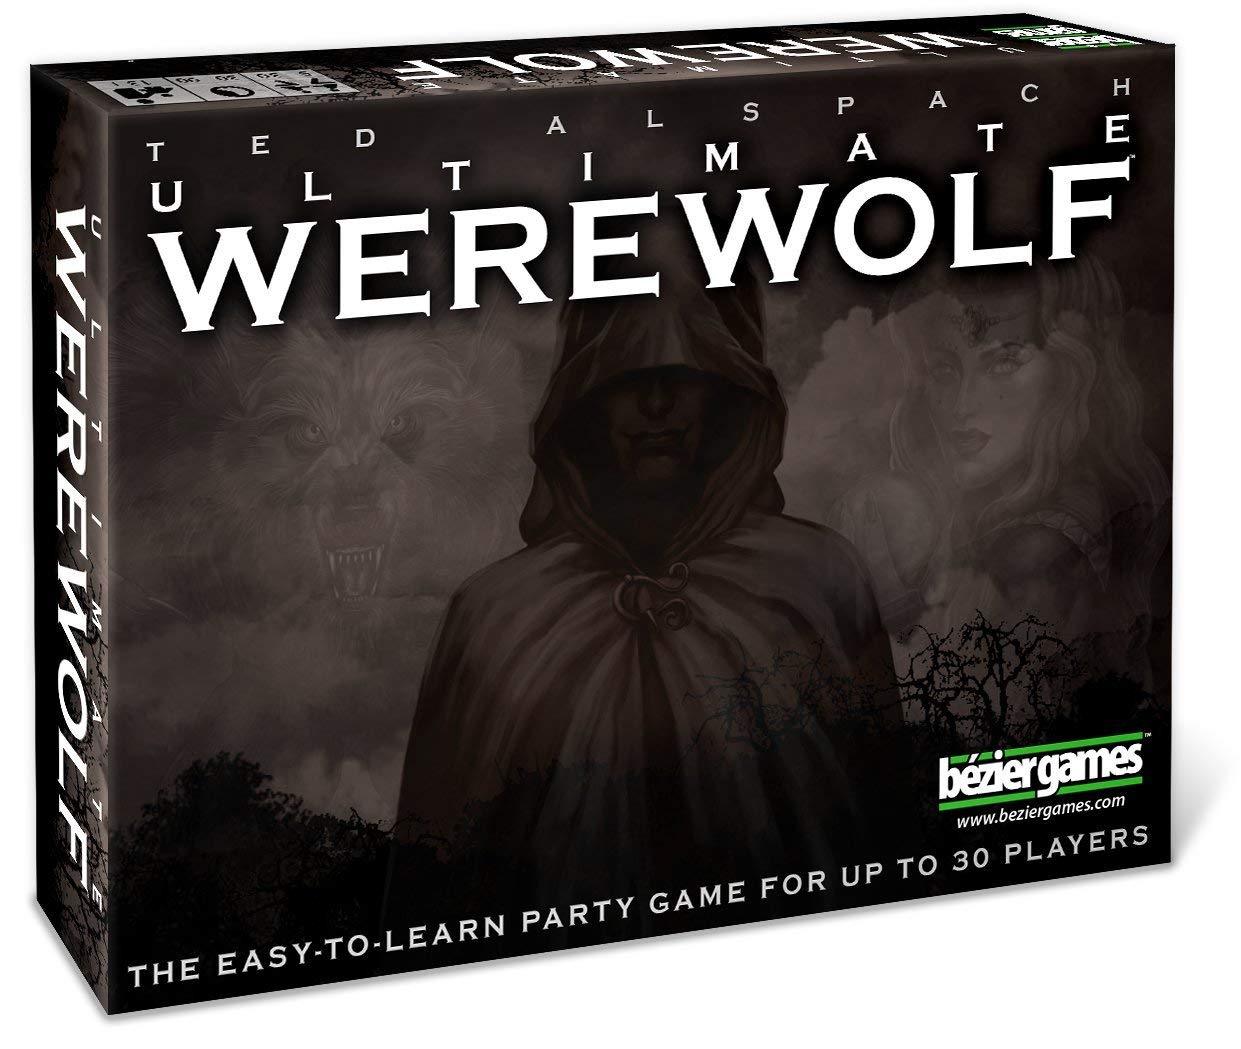 Ultimate Werewolf: Revised Edition | L.A. Mood Comics and Games